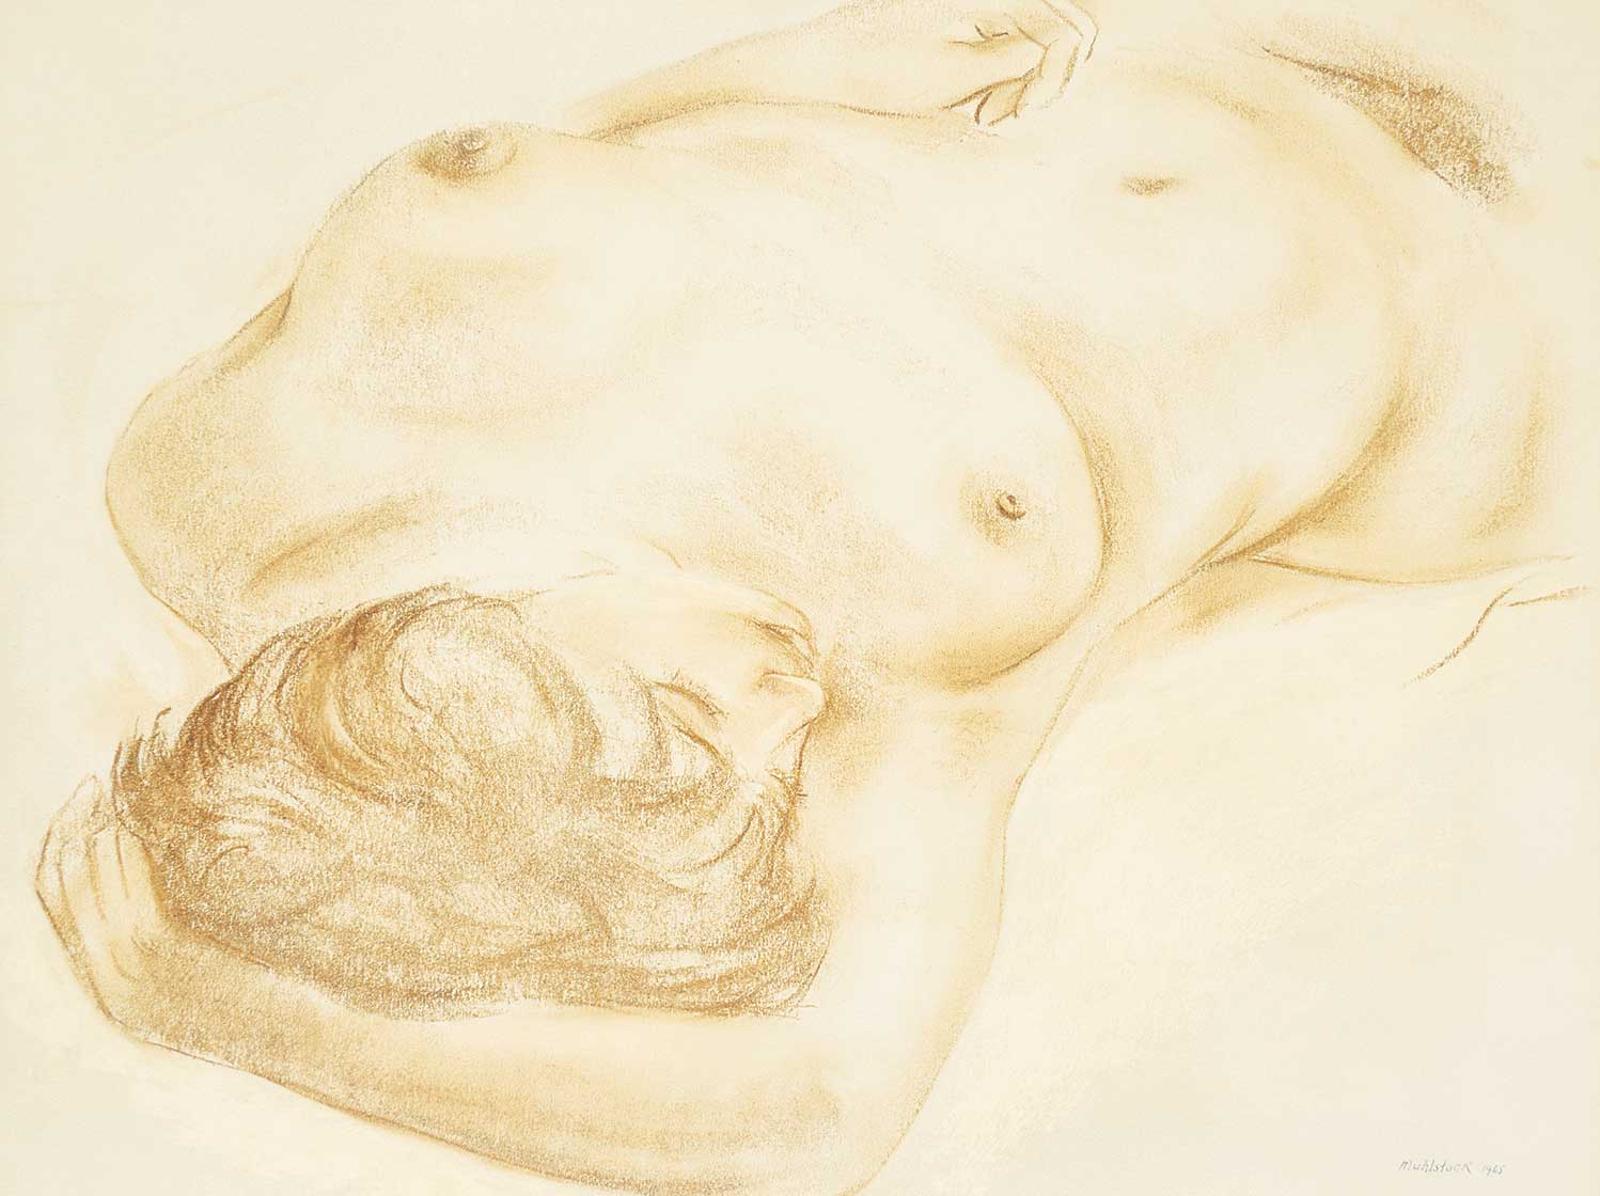 Louis Muhlstock (1904-2001) - Untitled - Reclining Nude